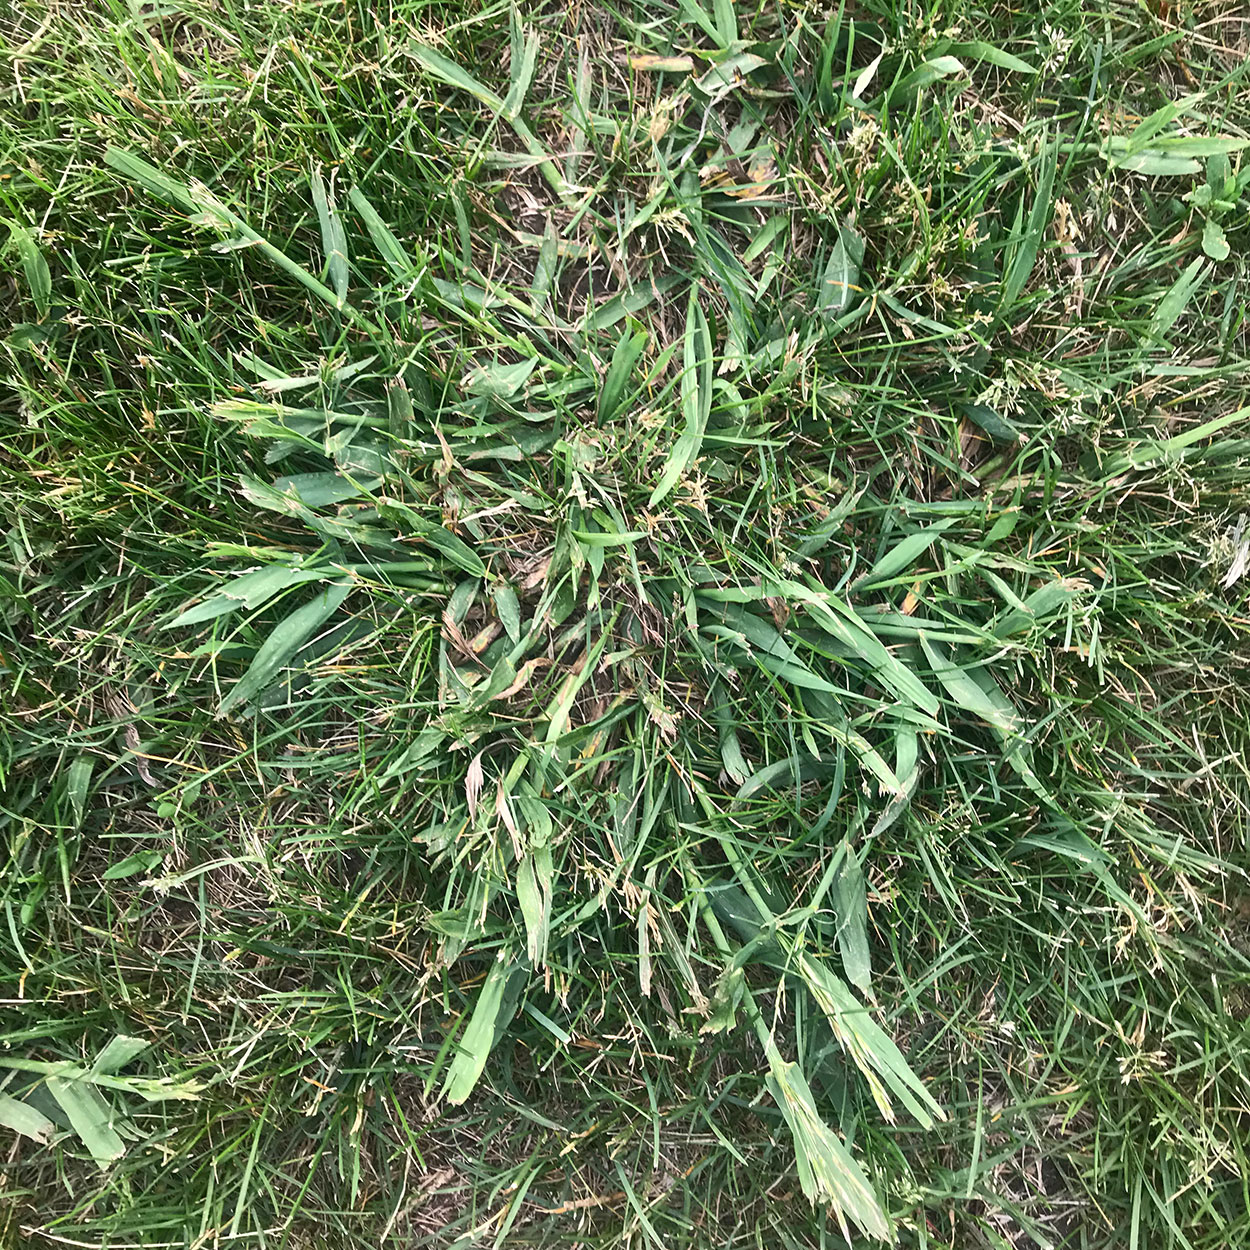 Grab grass spreading throughout a patch of turf.